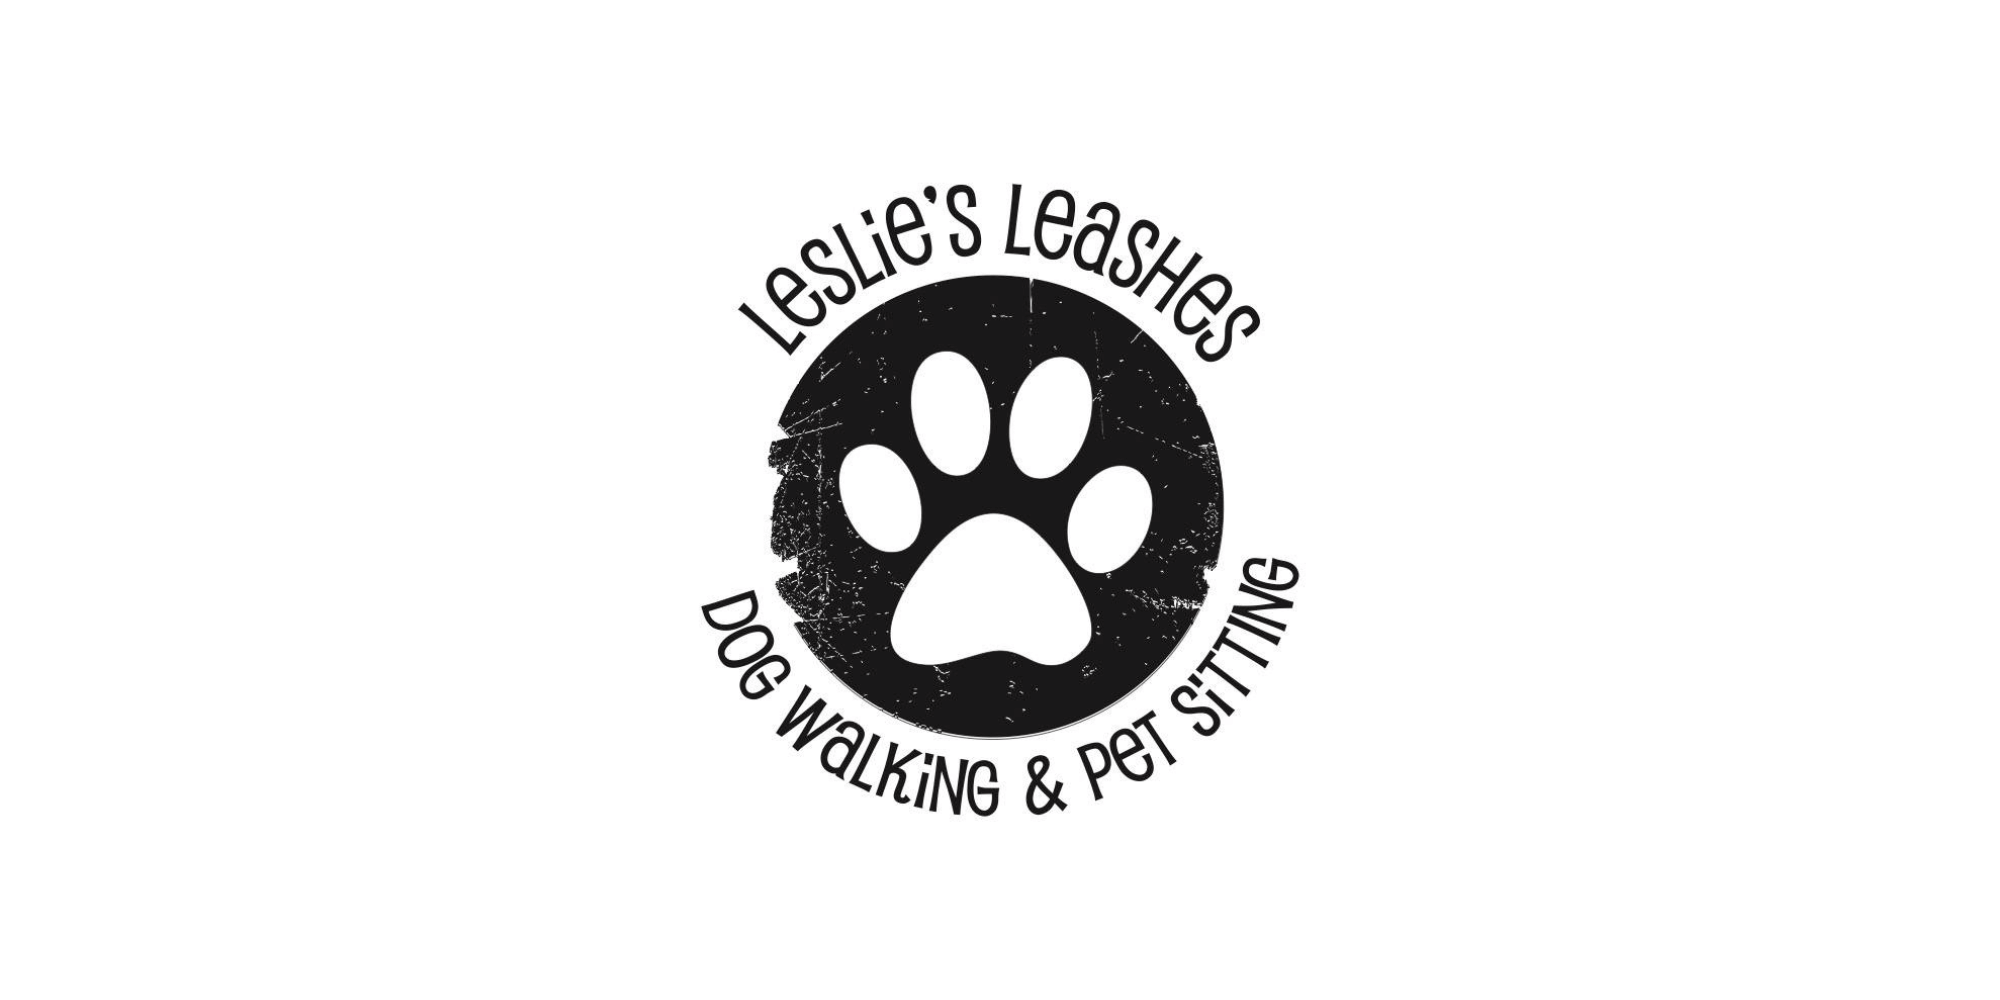 leslies-leashes-logo.png